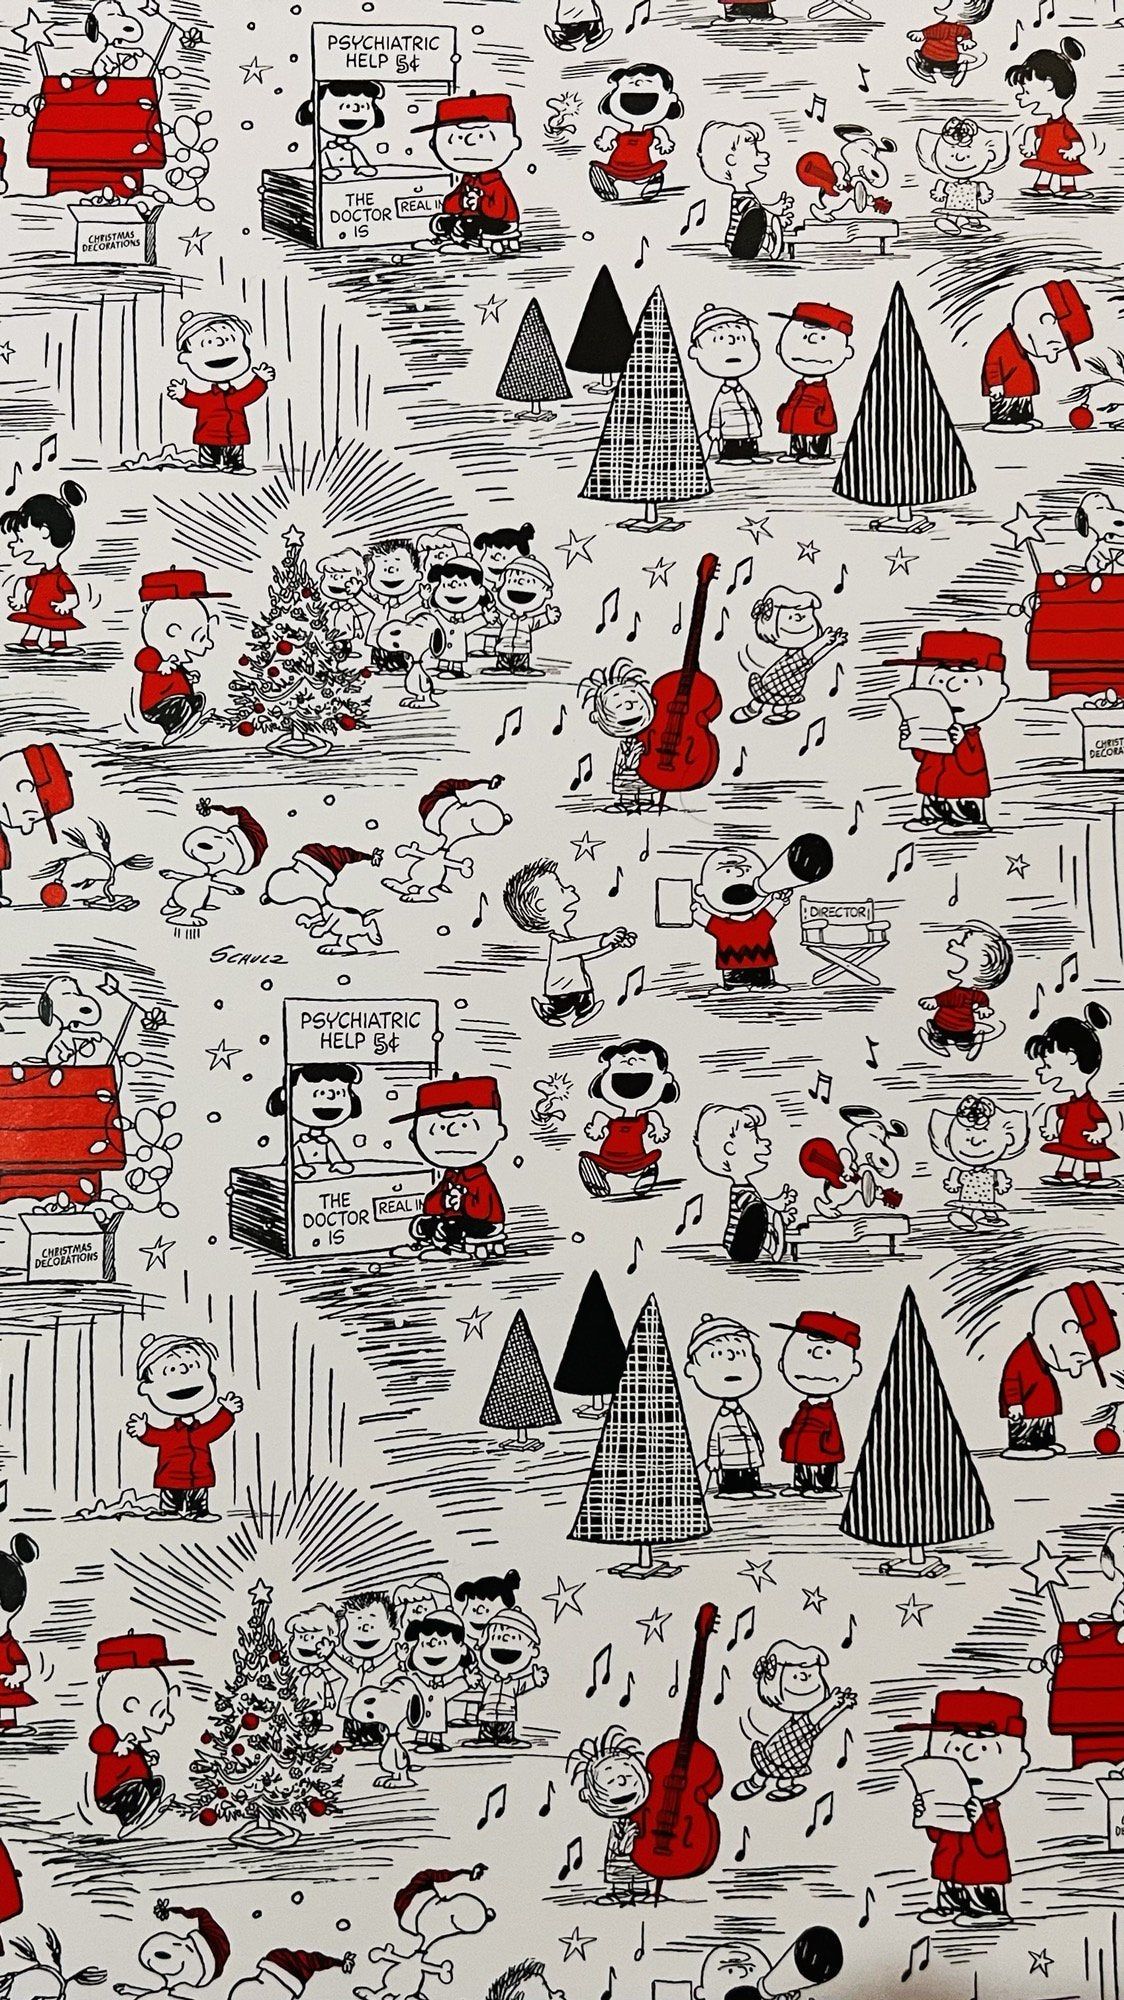 Another Peanuts Christmas wallpaper